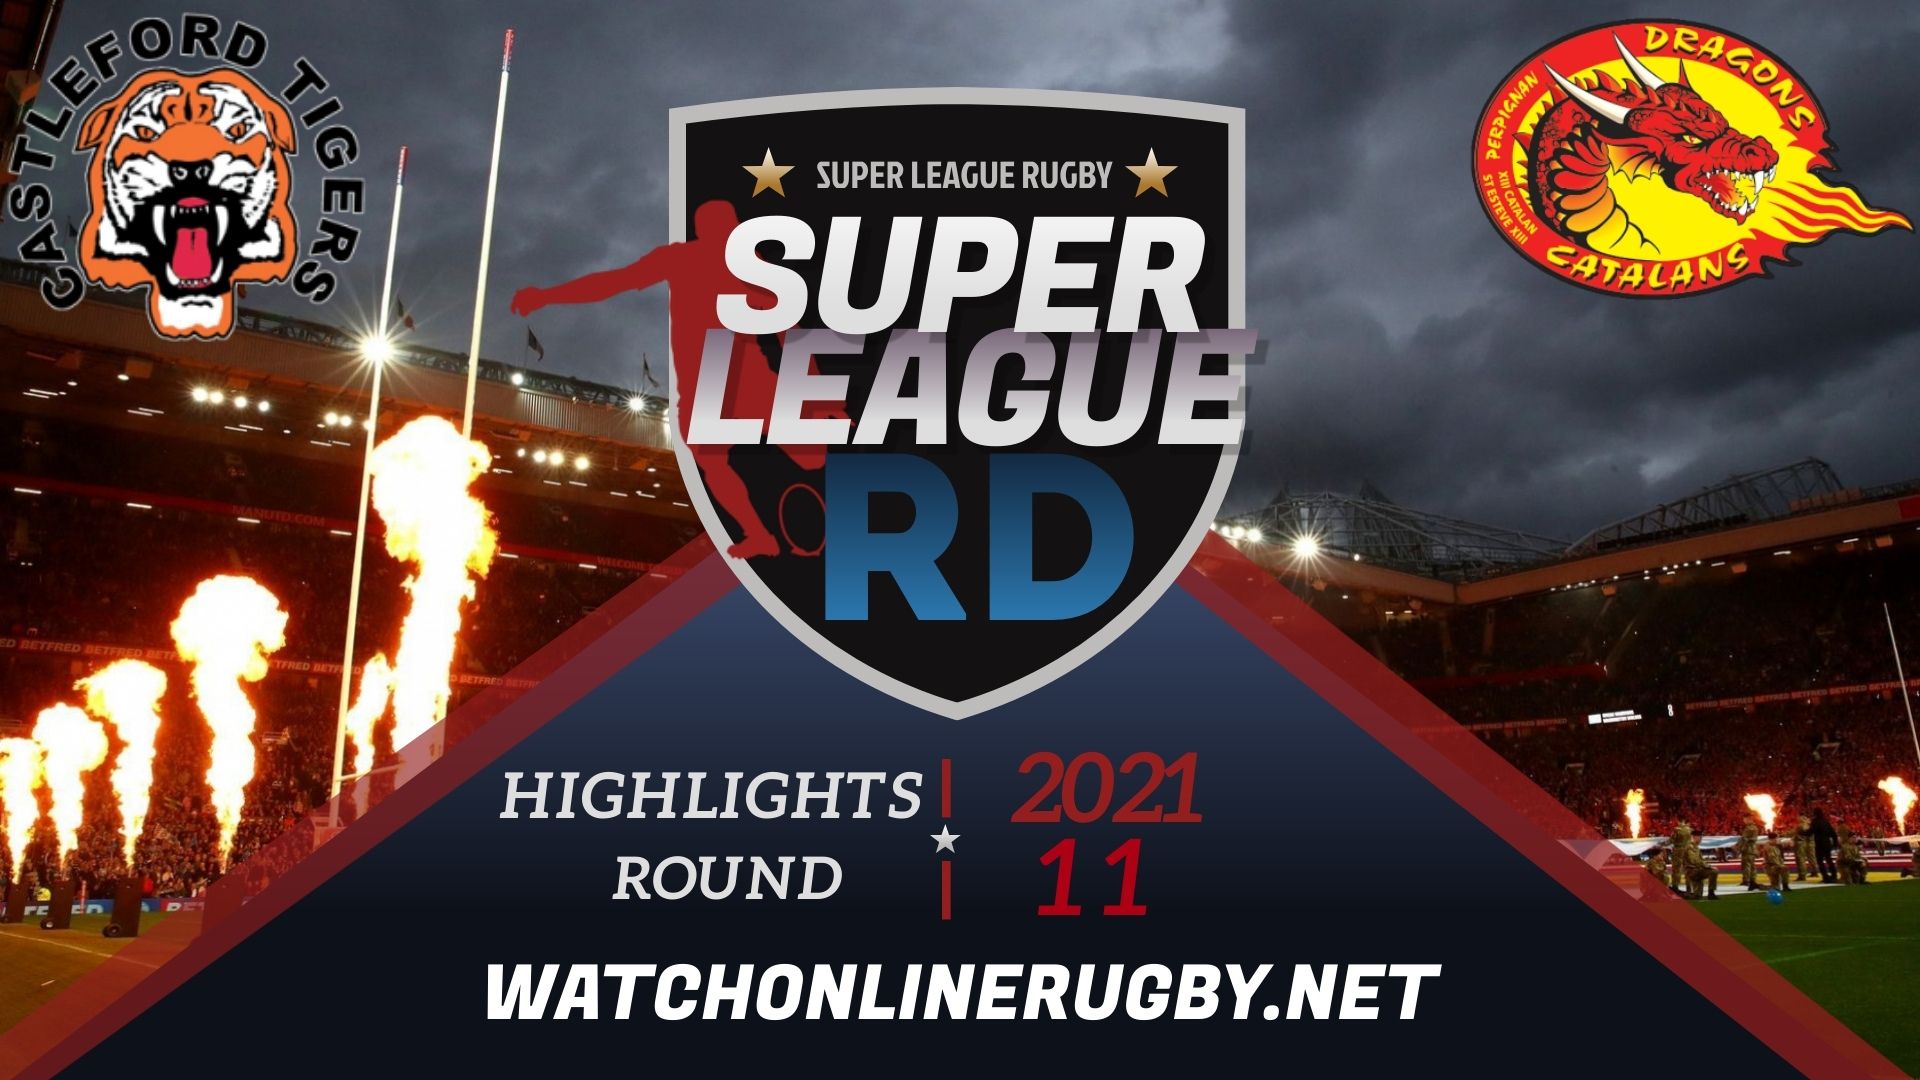 Castleford Tigers Vs Catalans Dragons Super League Rugby 2021 RD 11